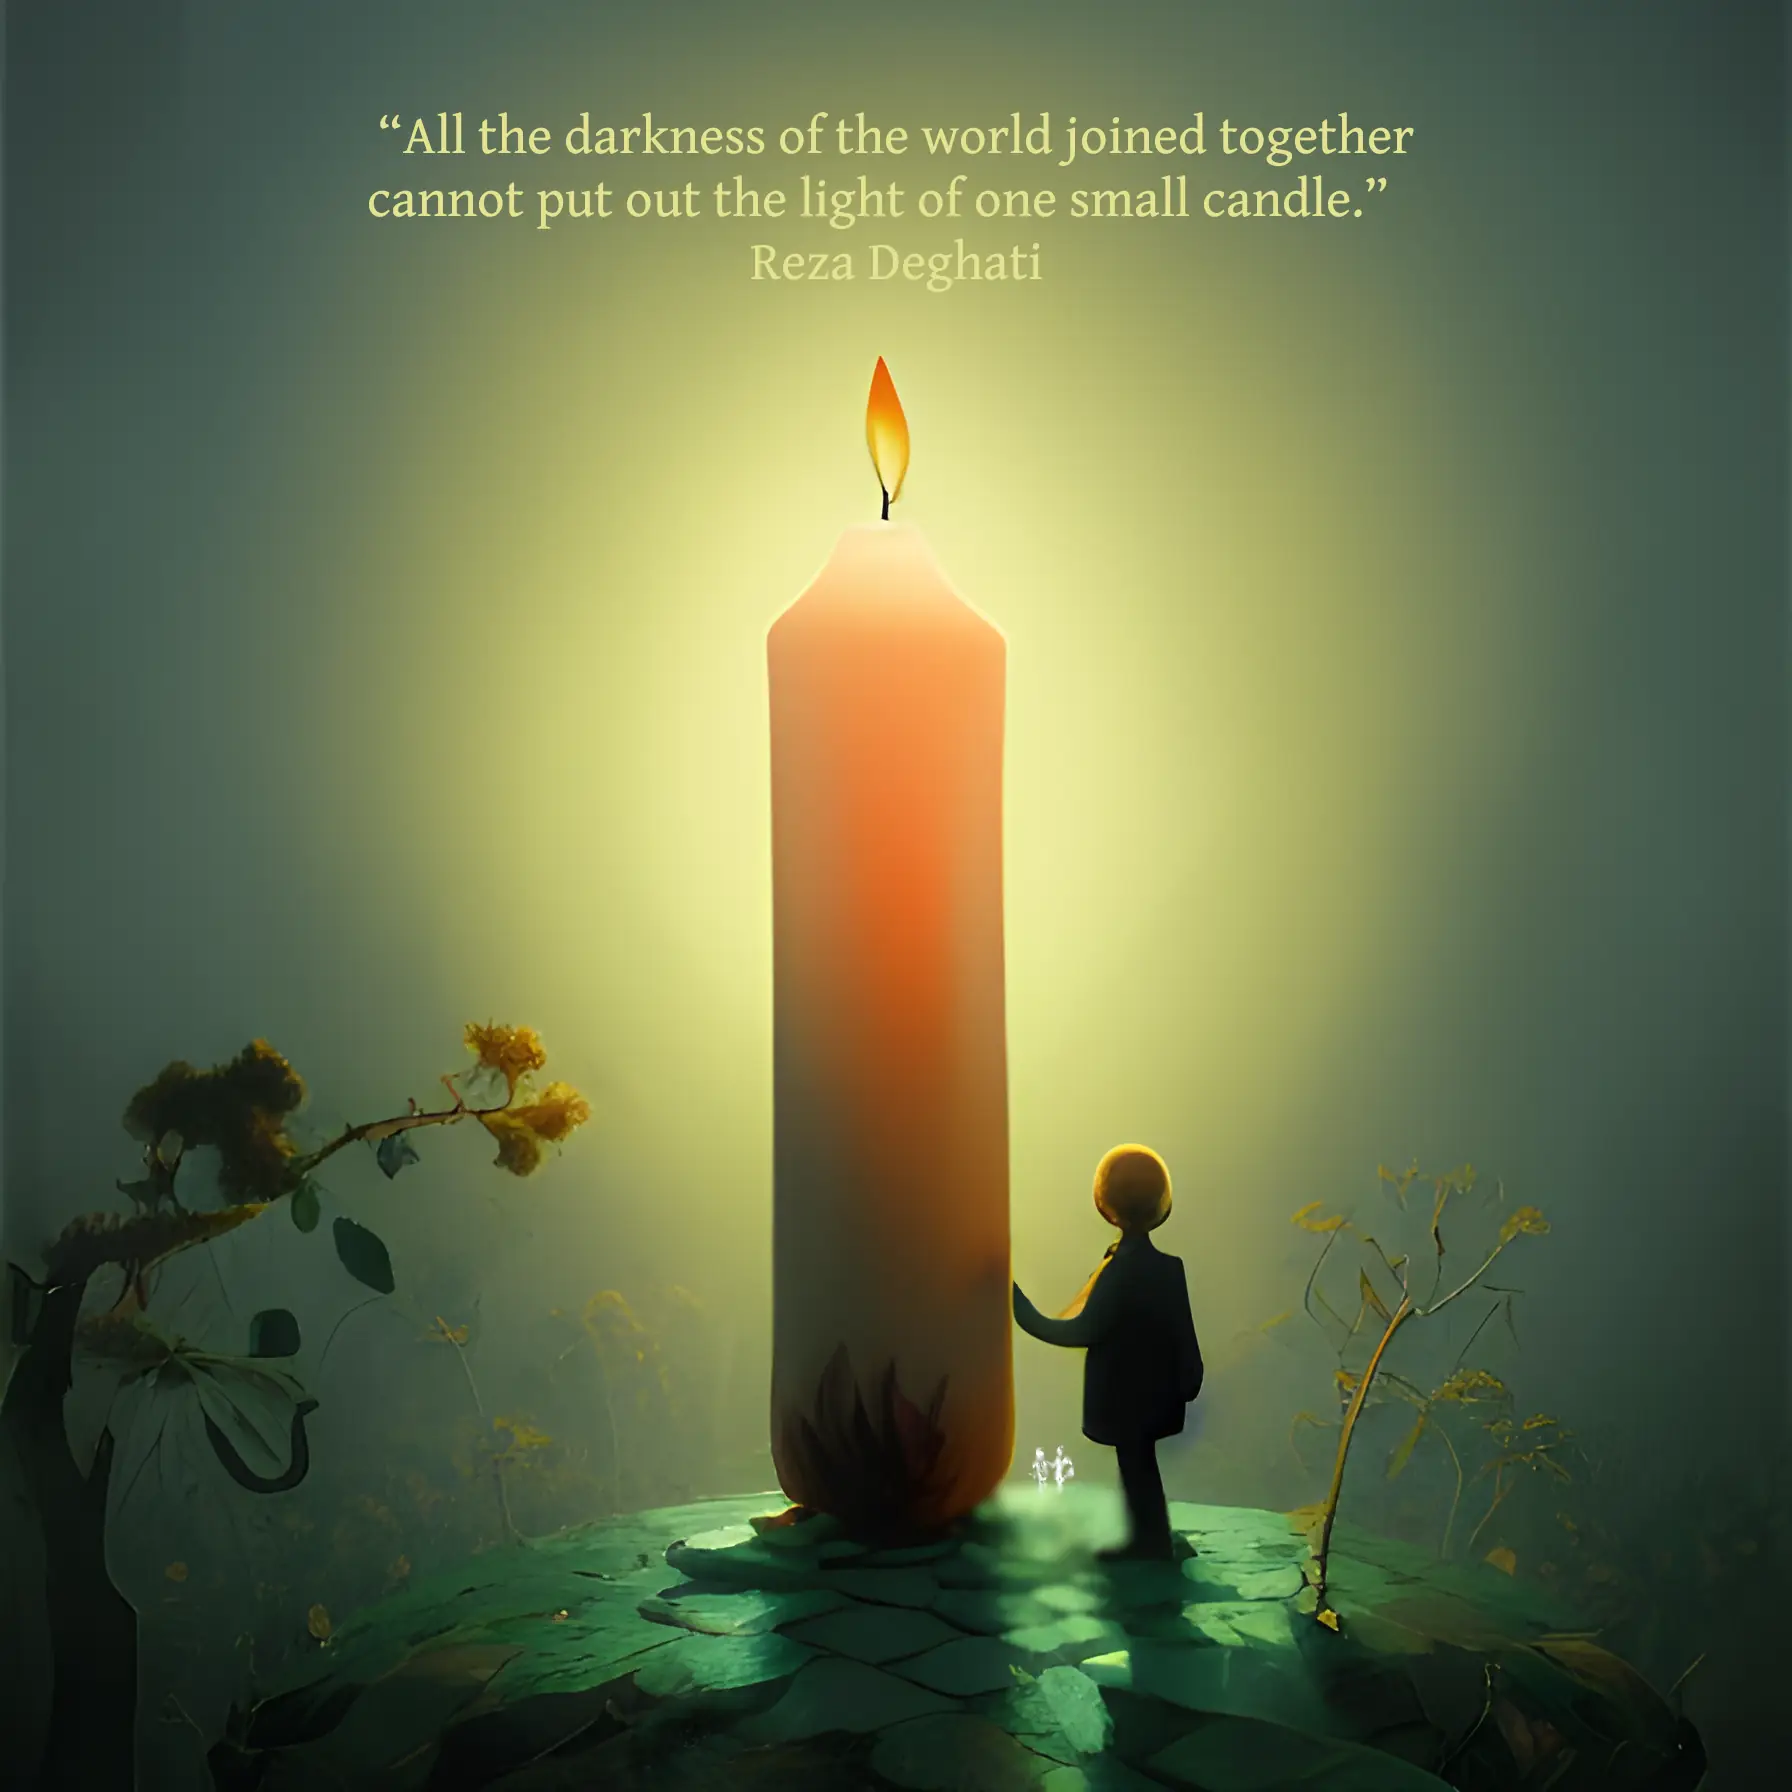 A person stands beside and touching a candle as tall as a house. A quote reads: “All the darkness of the world joined together cannot put out the light of one small candle.” Reza Deghati